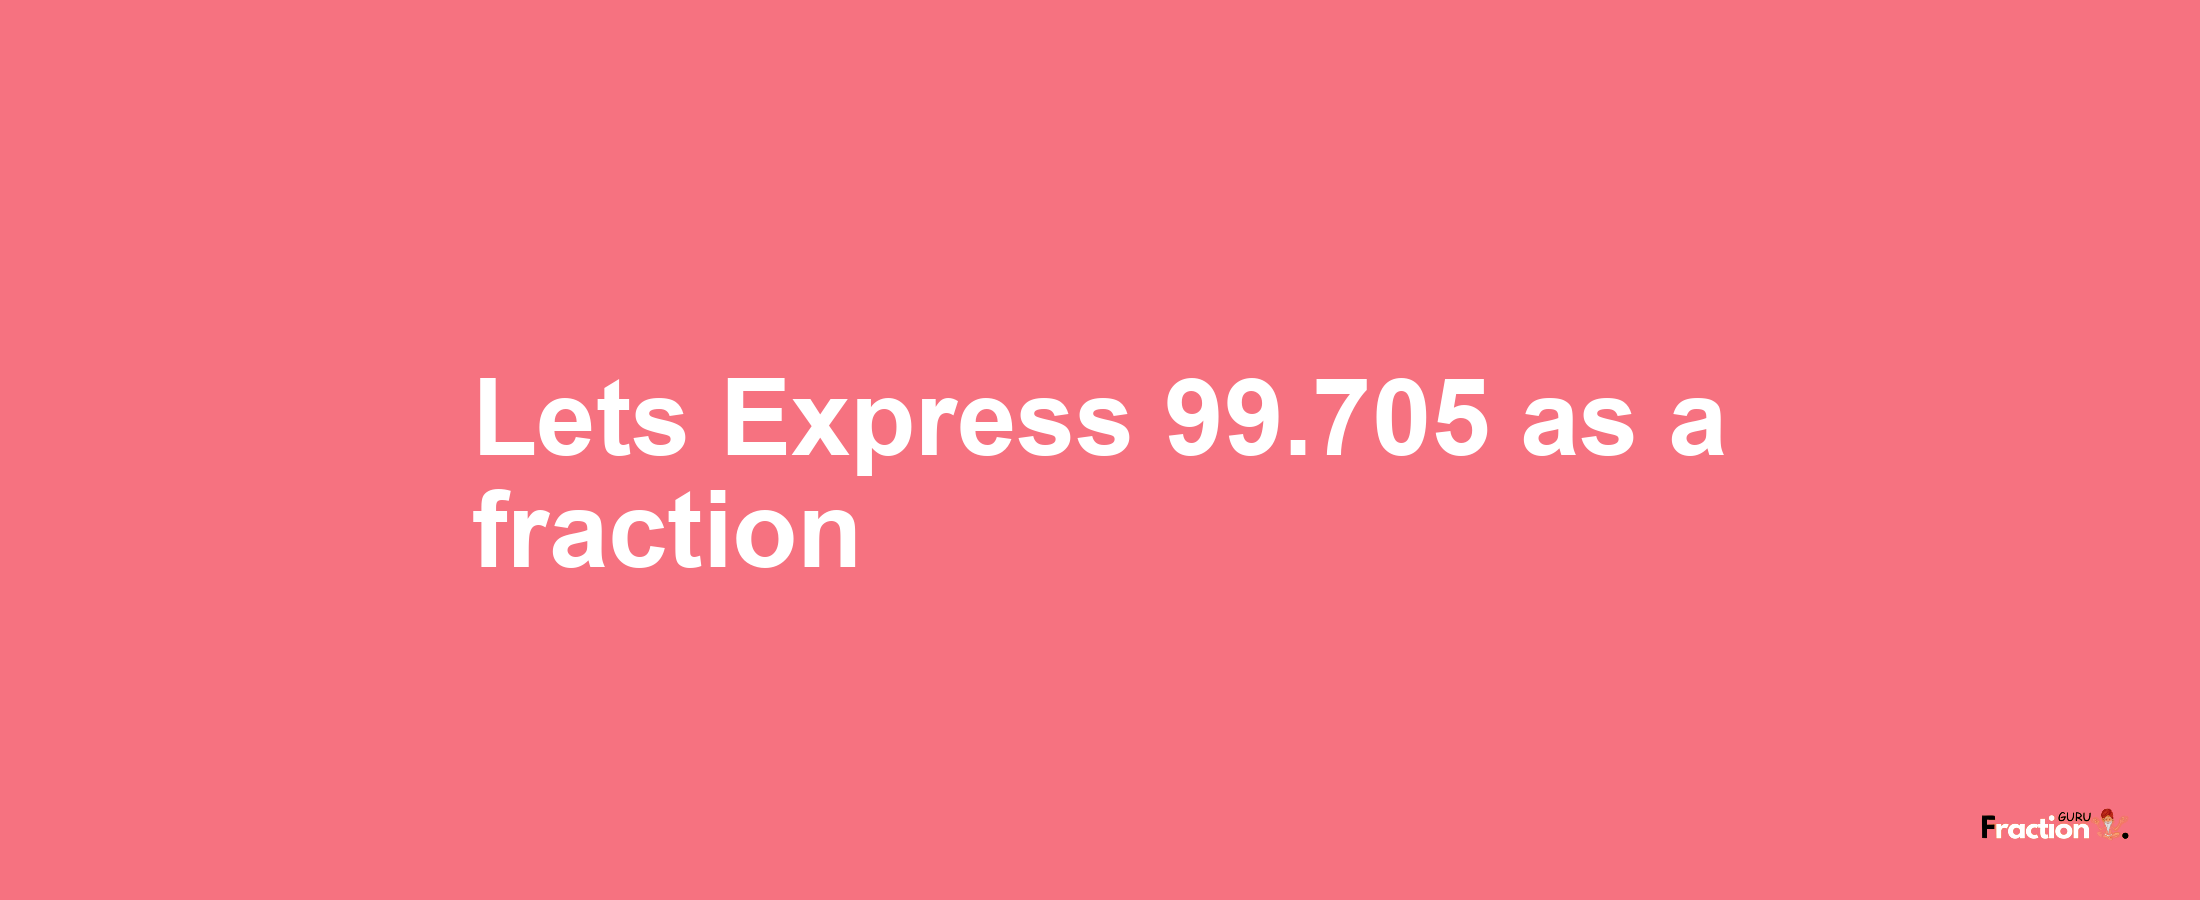 Lets Express 99.705 as afraction